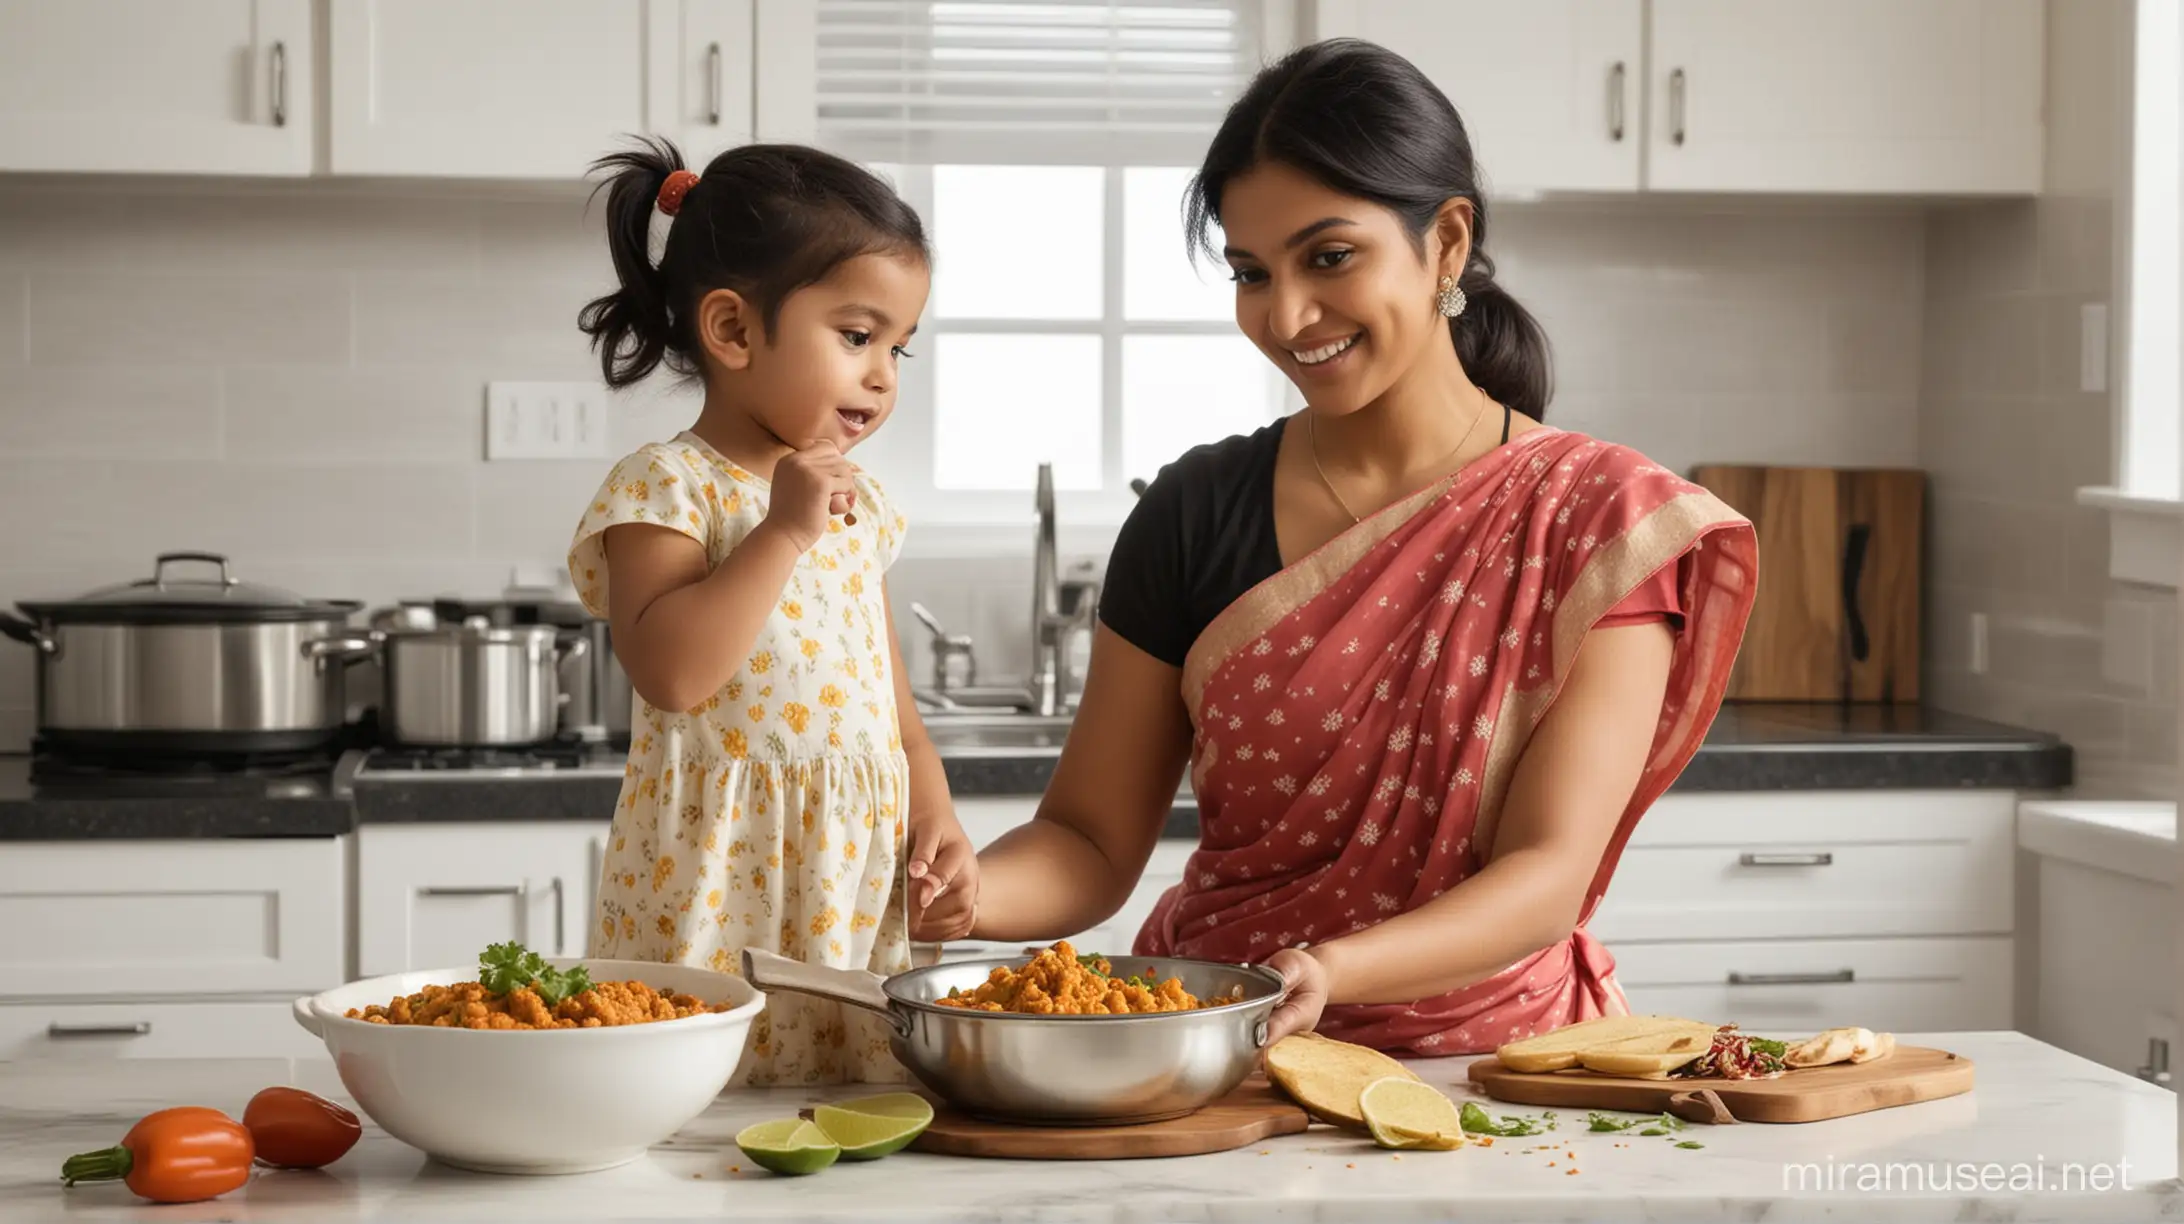 Young Indian Woman Cooking Indian Cuisine with Her Toddler Daughter in American Kitchen